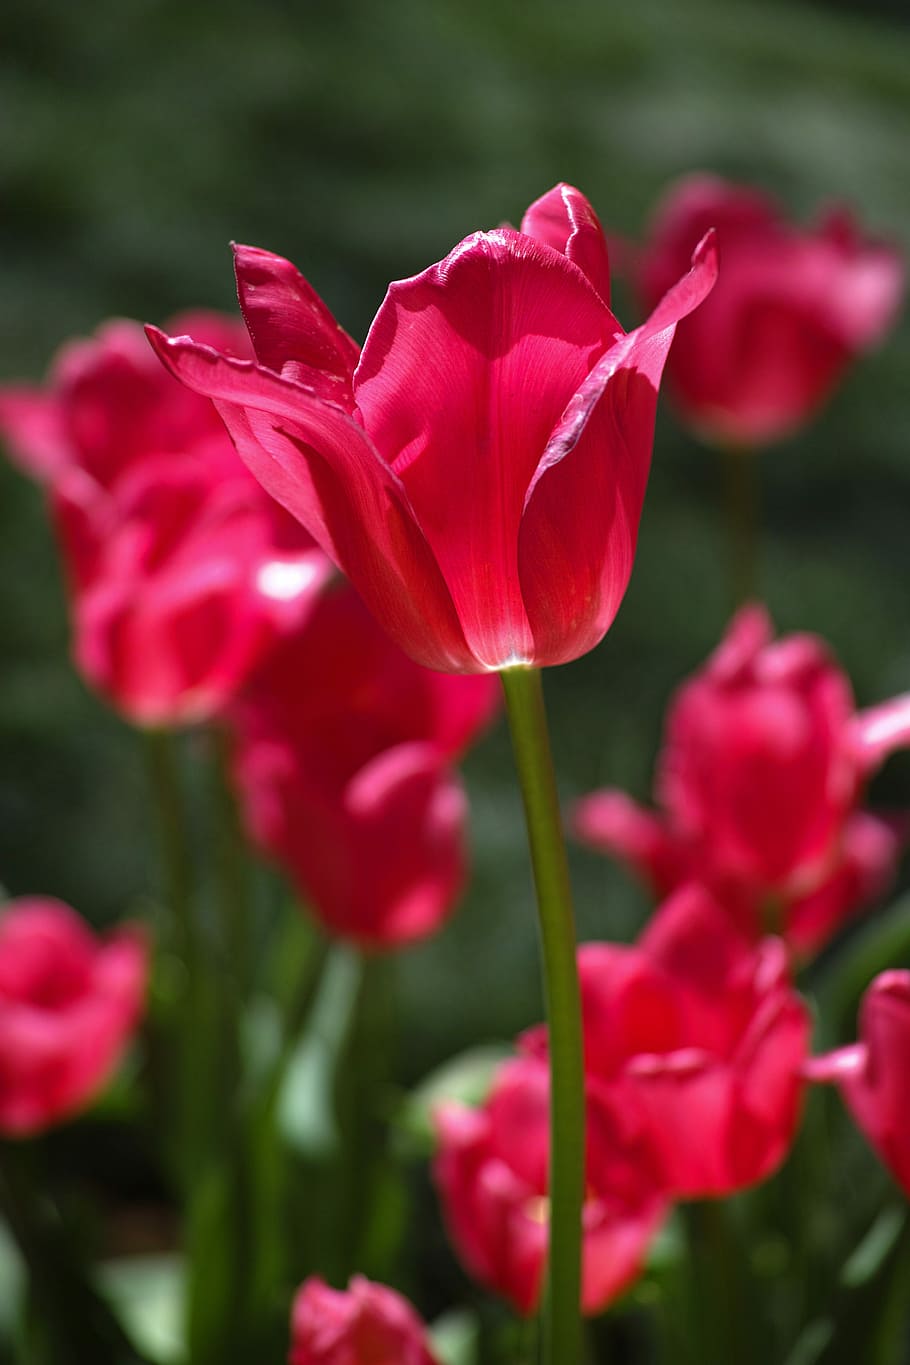 Flower, Tulips, red, spring, flowers, nature, plant, environmental, HD wallpaper